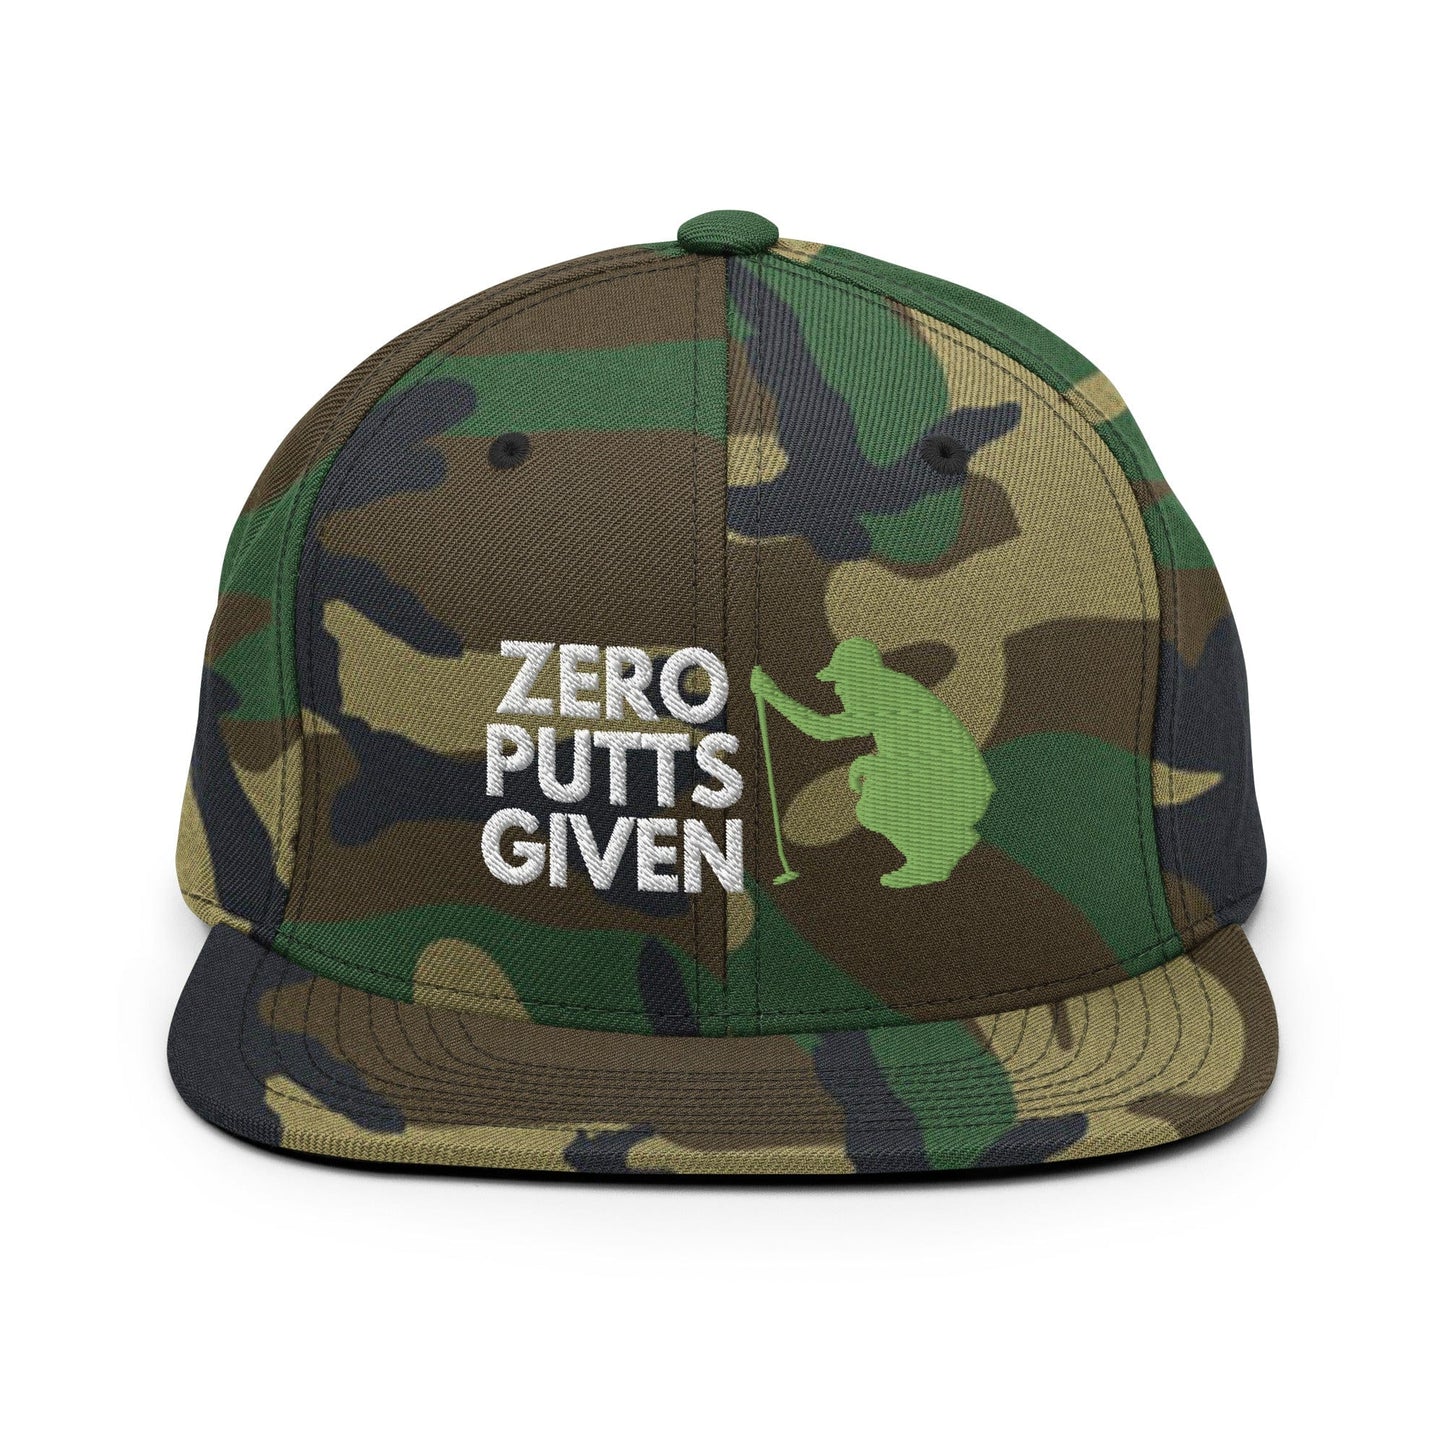 Funny Golfer Gifts  Snapback Hat Green Camo Zero Putts Given Hat Snapback Hat